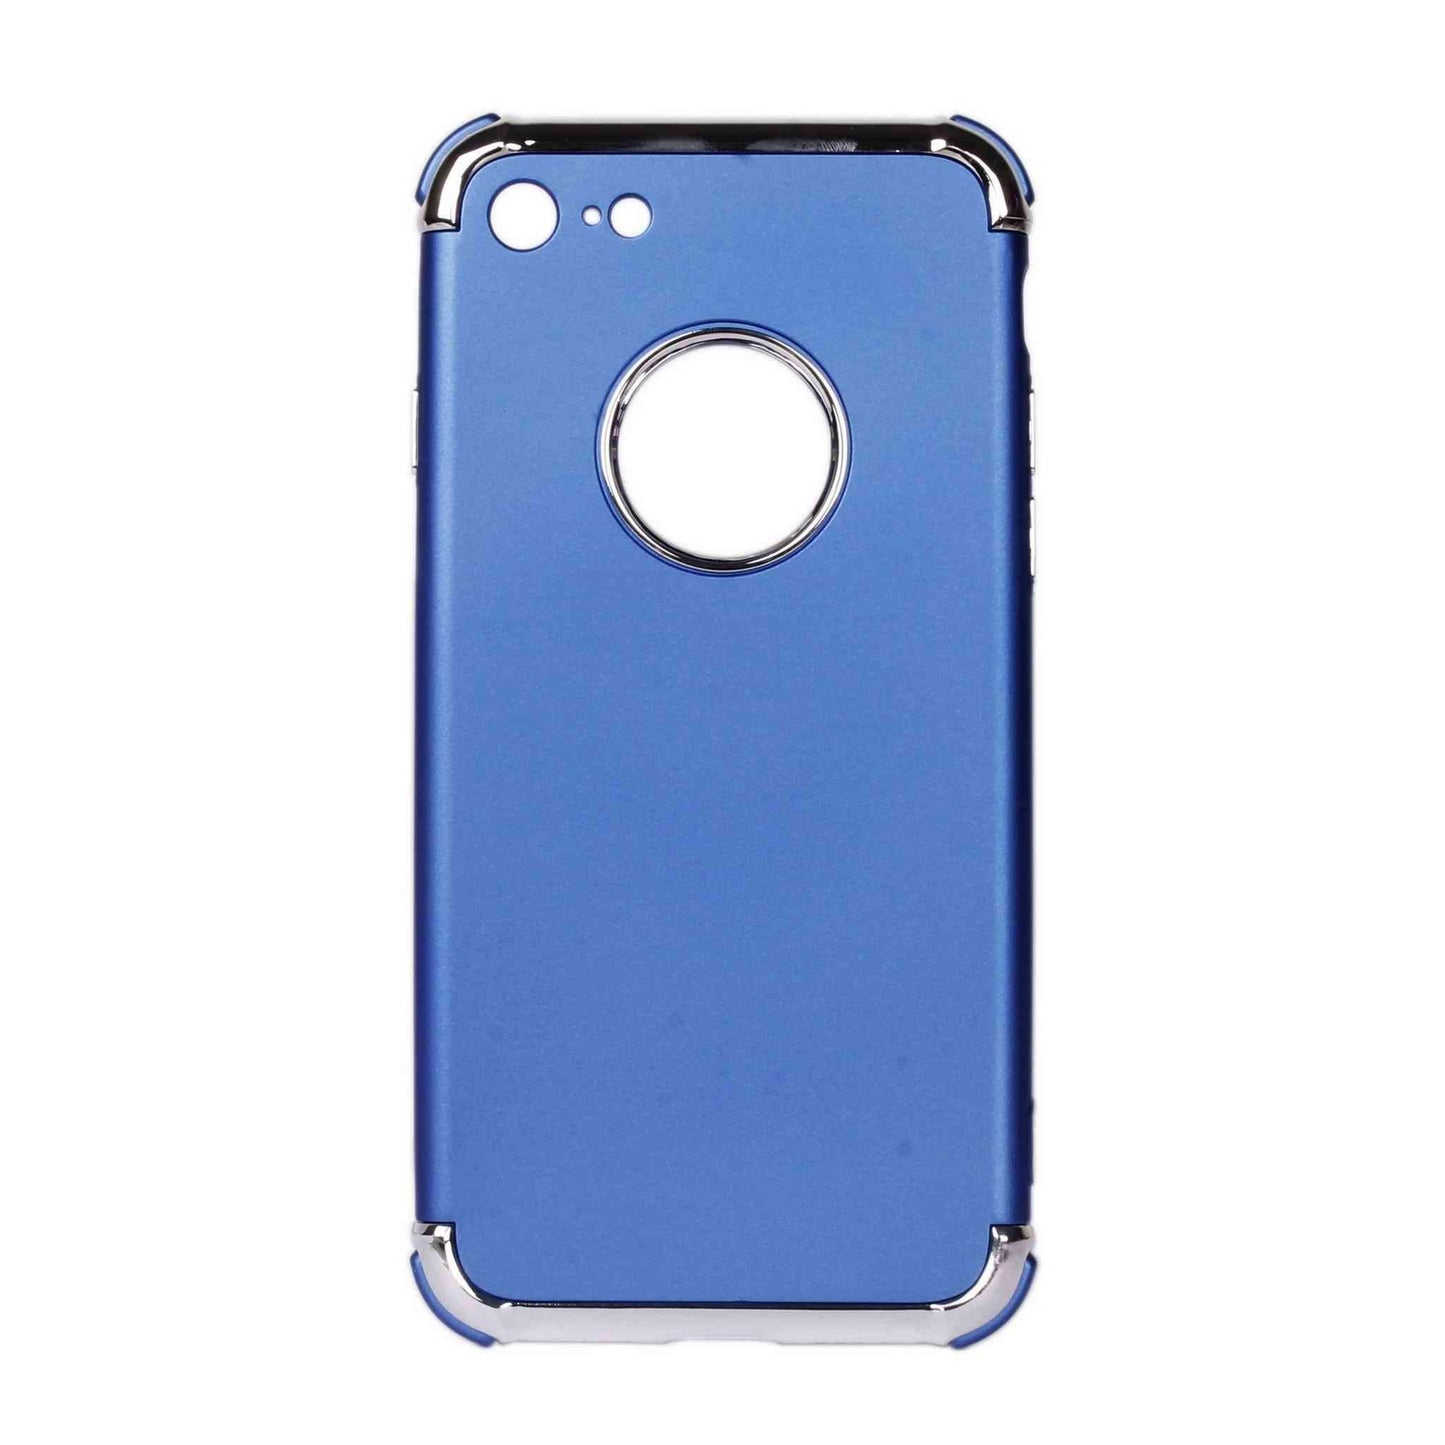 Indian Petals Polycarbonate Electro-plated Shock-proof Anti-scratch Protective Mobile Back Case Cover for Apple iPhone 8, Blue - Indian Petals